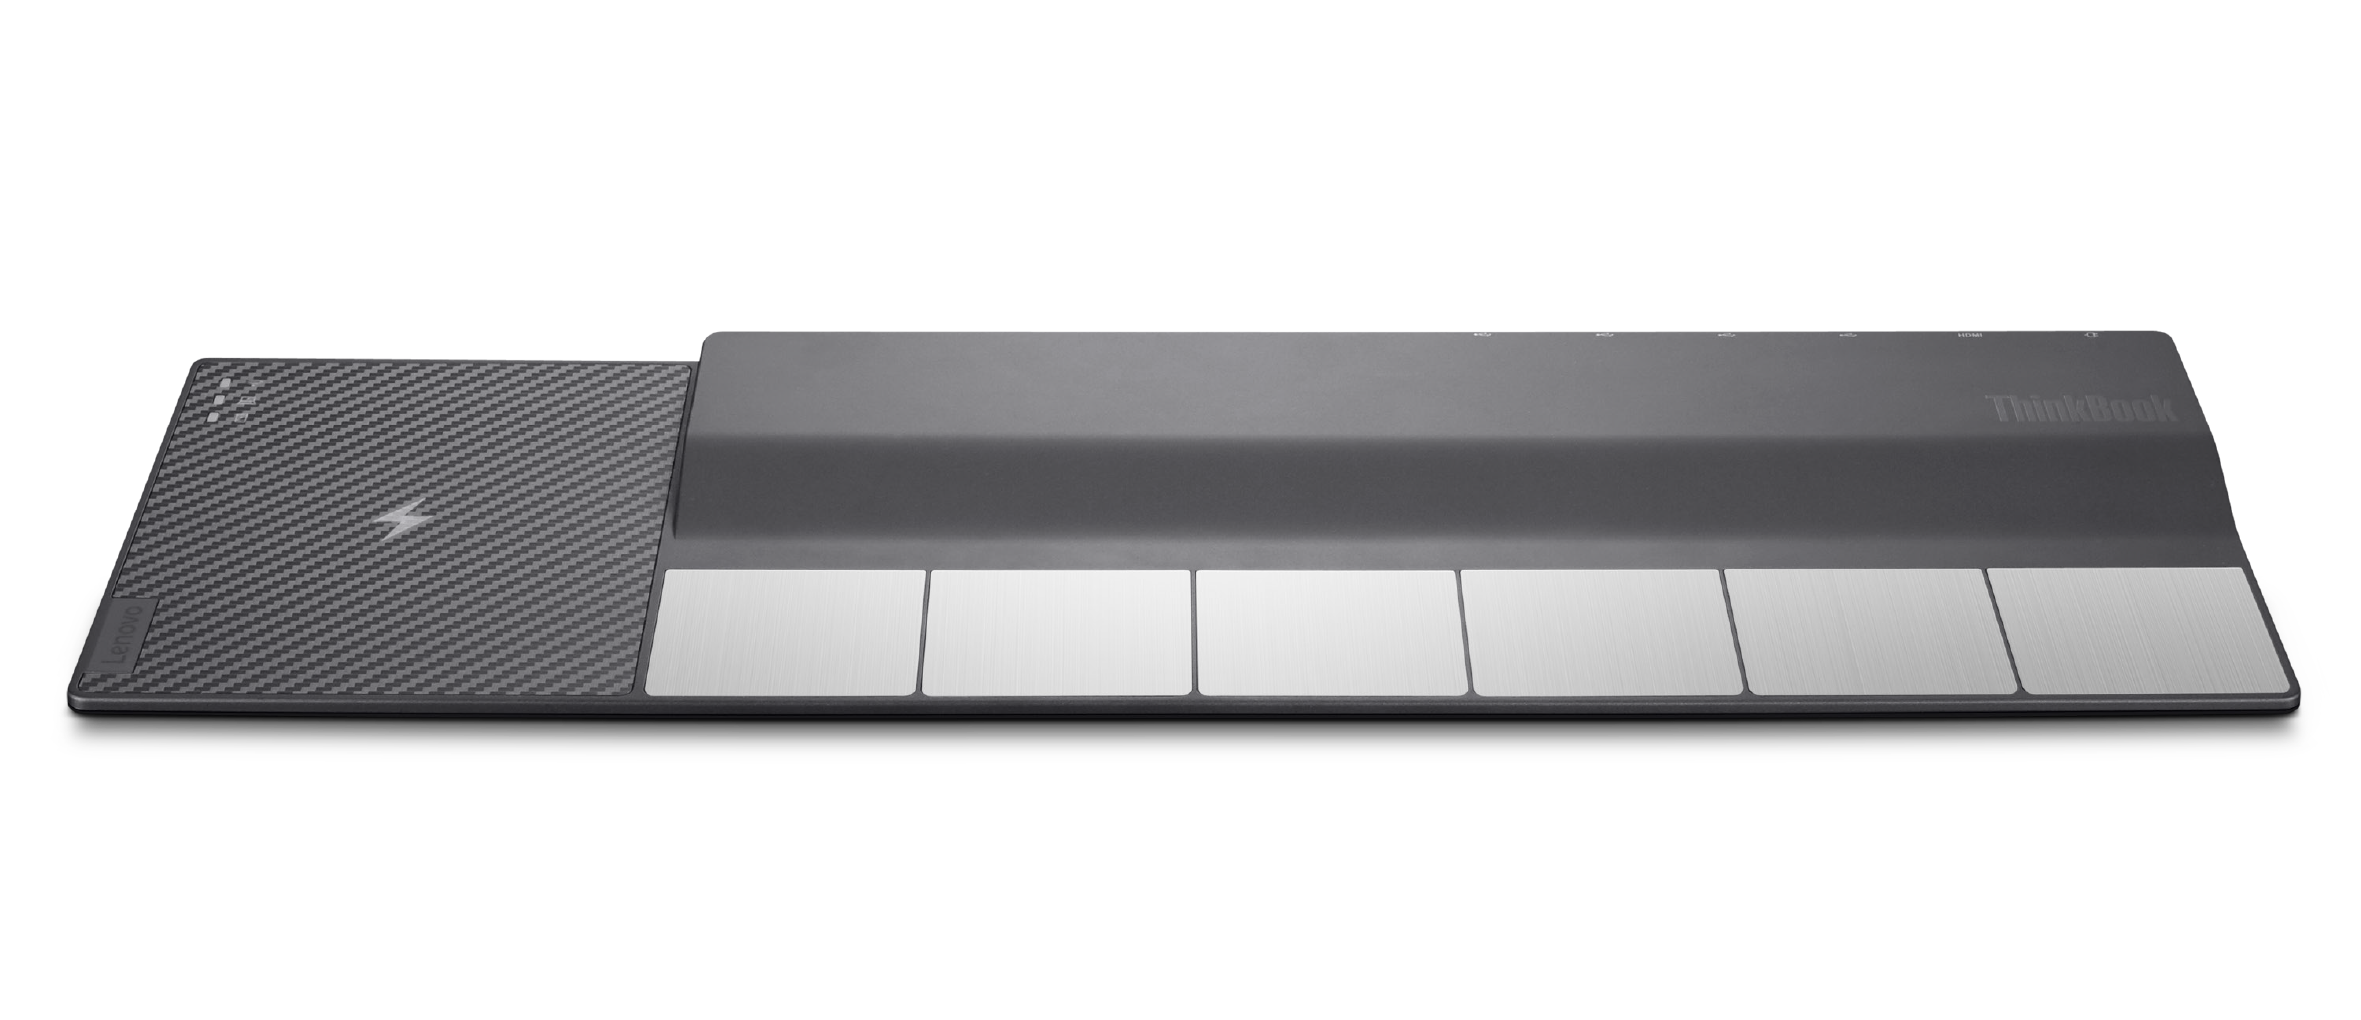 Lenovo Thinkbook wireless dock embedding Power by Contact wireless charging technology